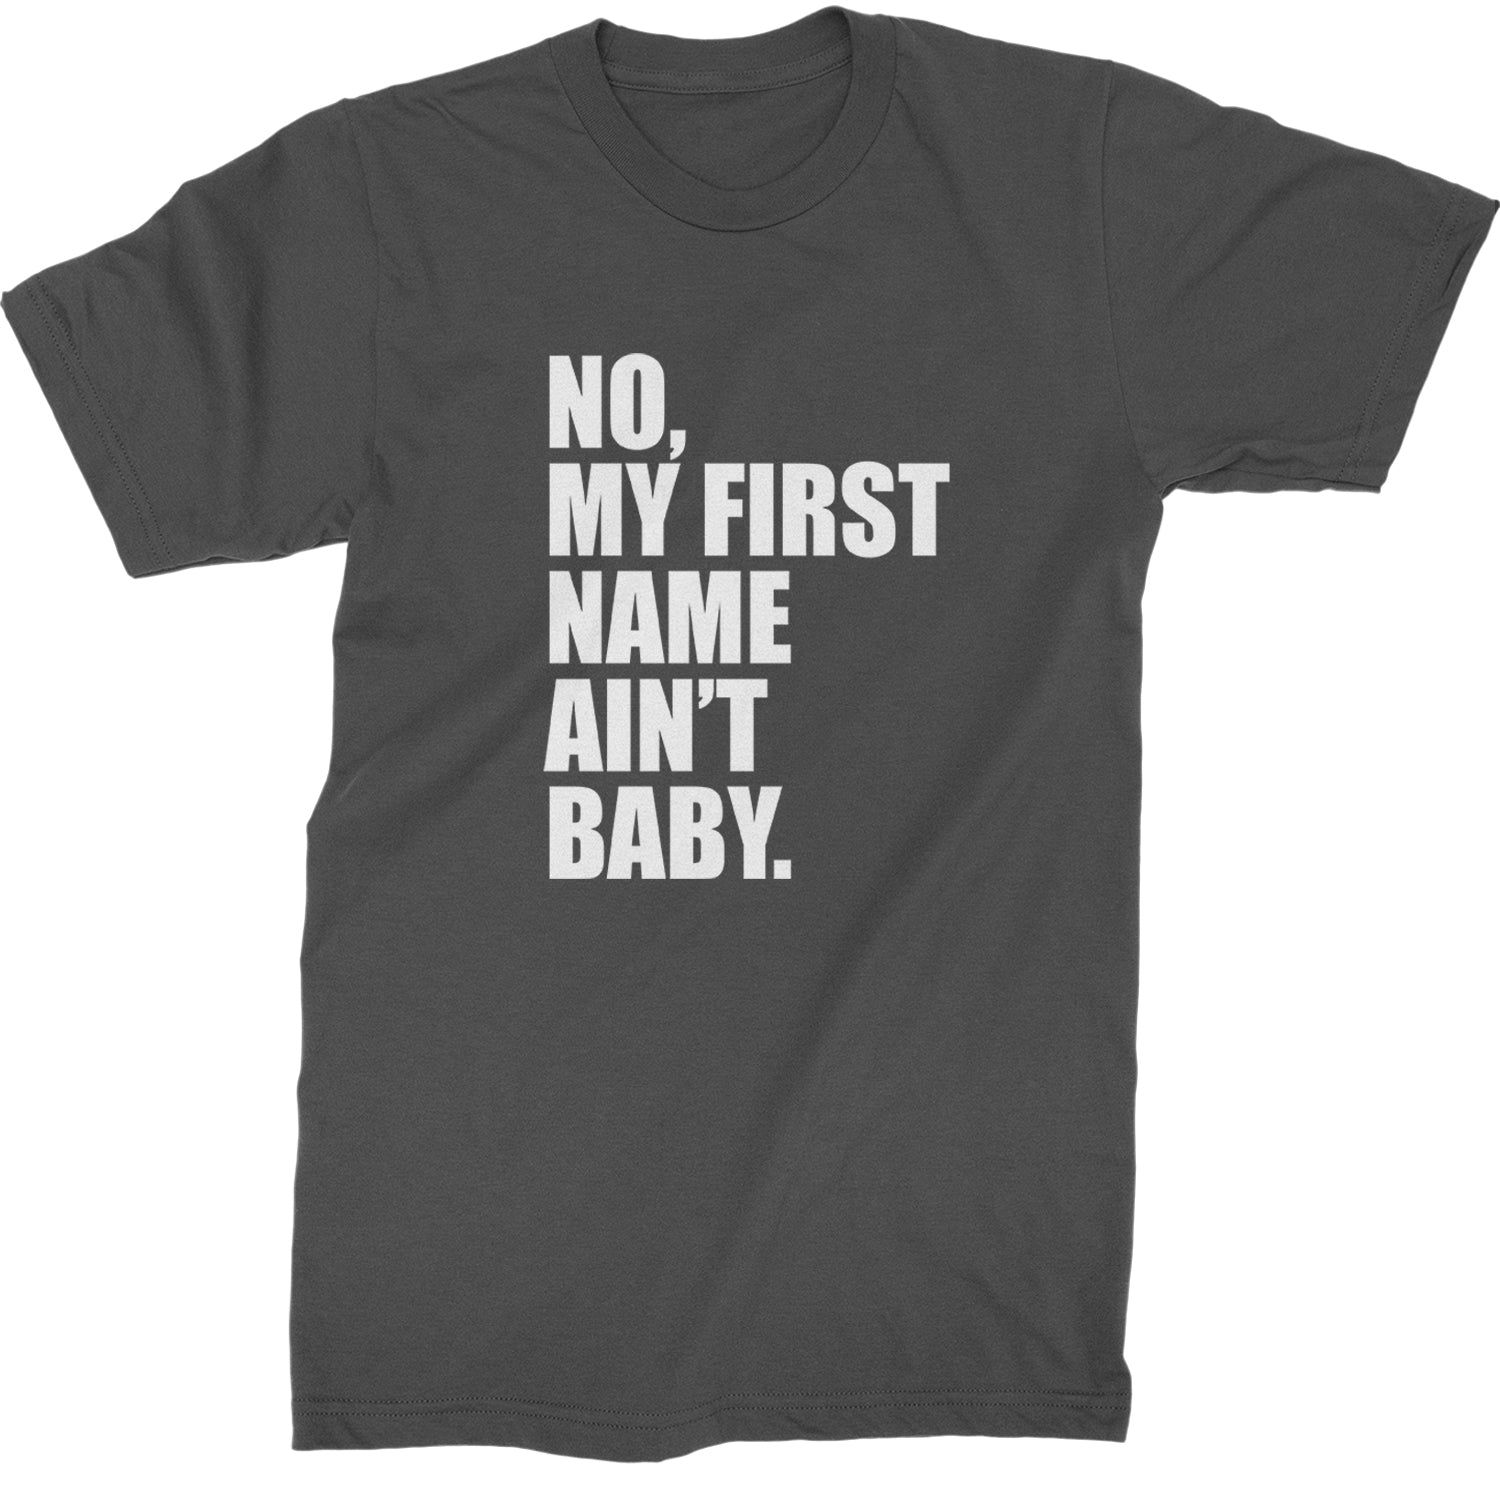 No My First Name Ain't Baby Together Again Mens T-shirt Charcoal Grey